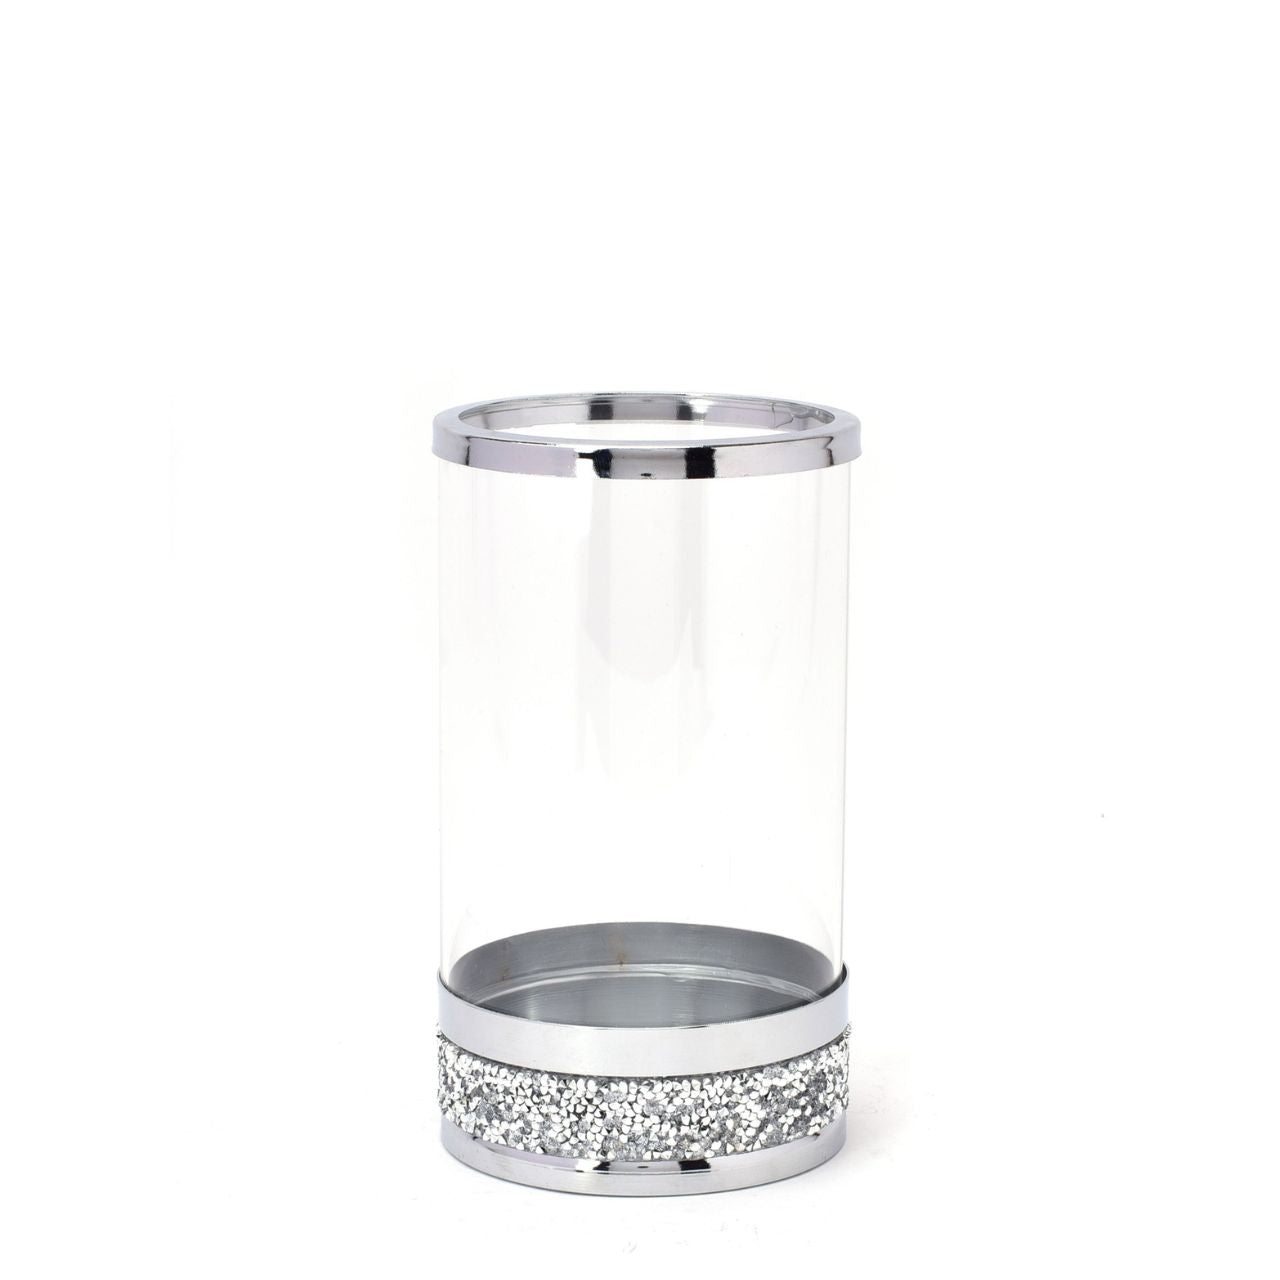 Hestia Candle Holder Glass with Diamante Base 10cm  This contemporary candle holder features an elegant metal effect rim and a stunning diamante base. With a clear glass tube plinth, simply add a pillar candle, votive or tealight to make the perfect table centrepiece.